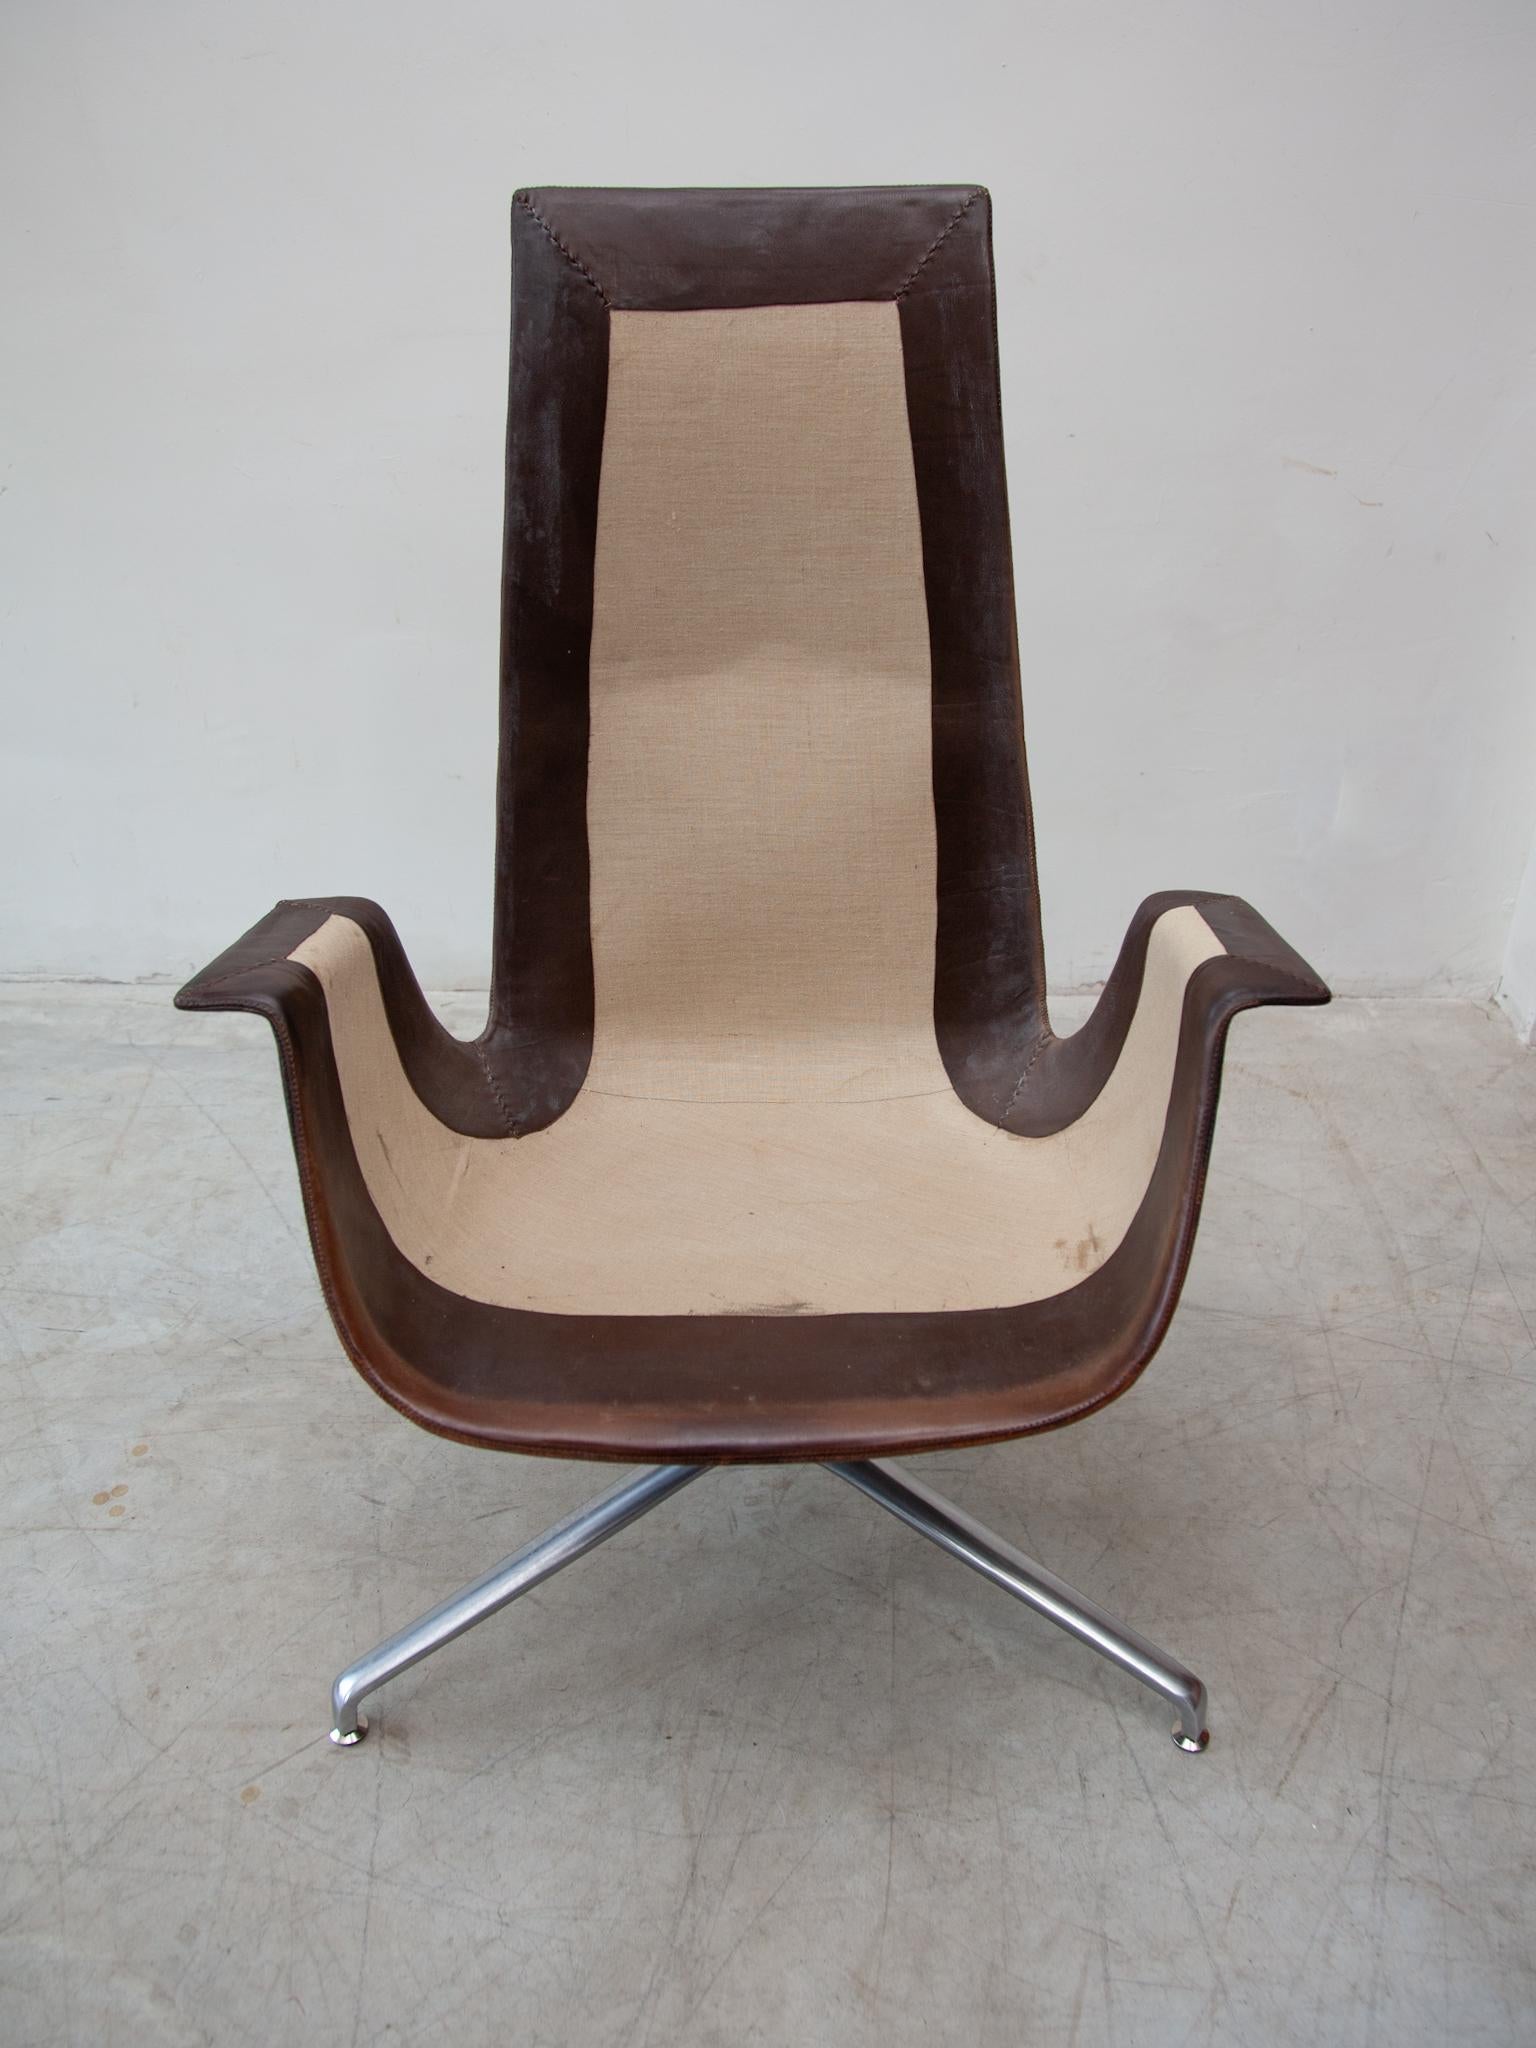 Danish High Back Tulip Swivel Chair by Fabricius, Kastholm for Kill, Model Fk 6725 For Sale